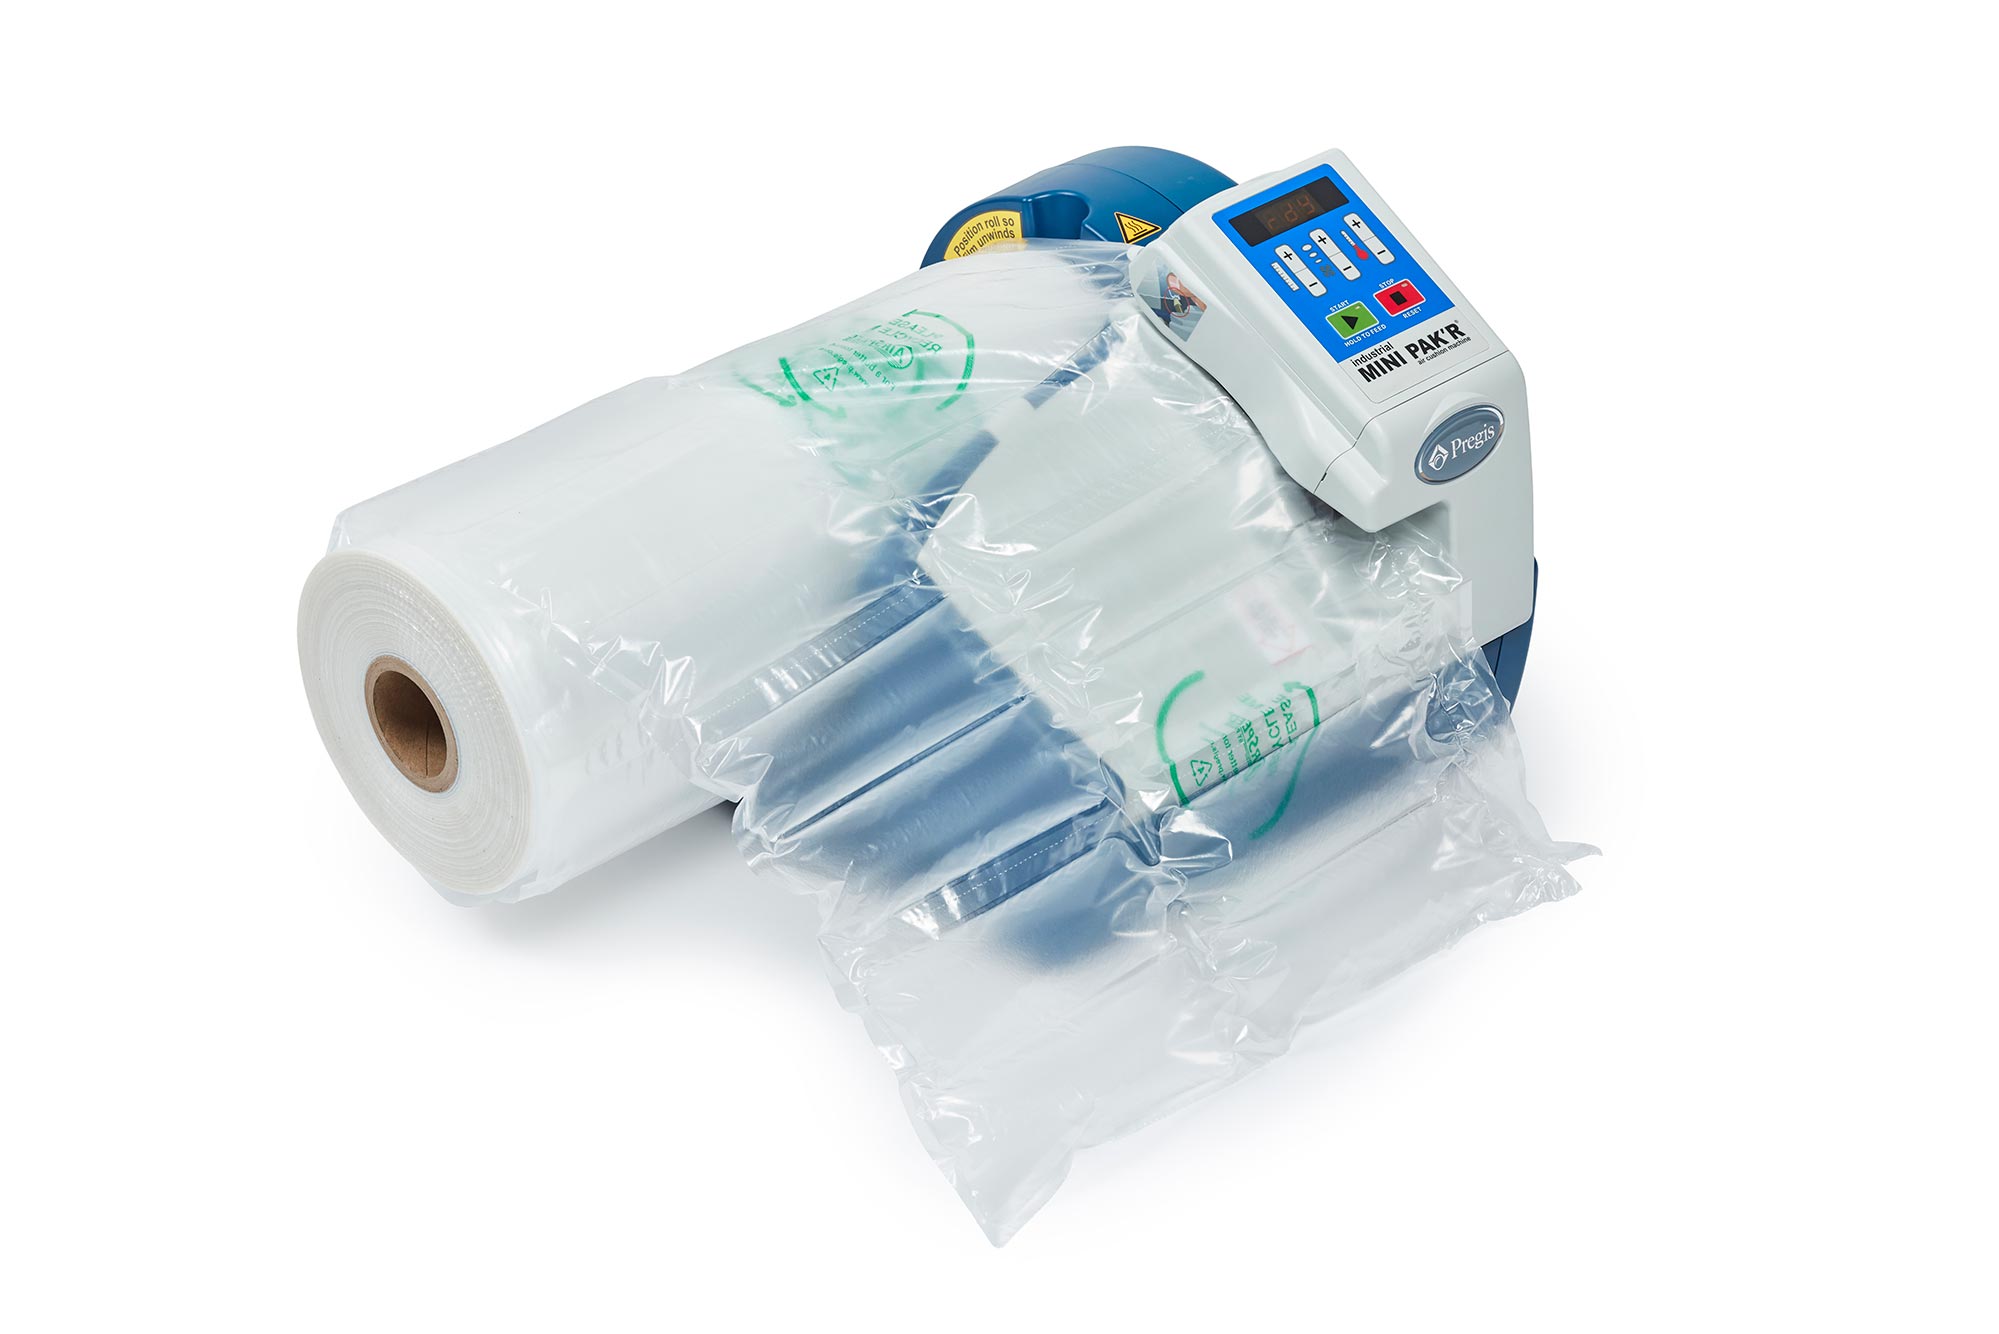 Quilt Air Large Pillow Cushion Film For Mini PakR Machine 656Ft 200M Roll Handy Andy Shipping 